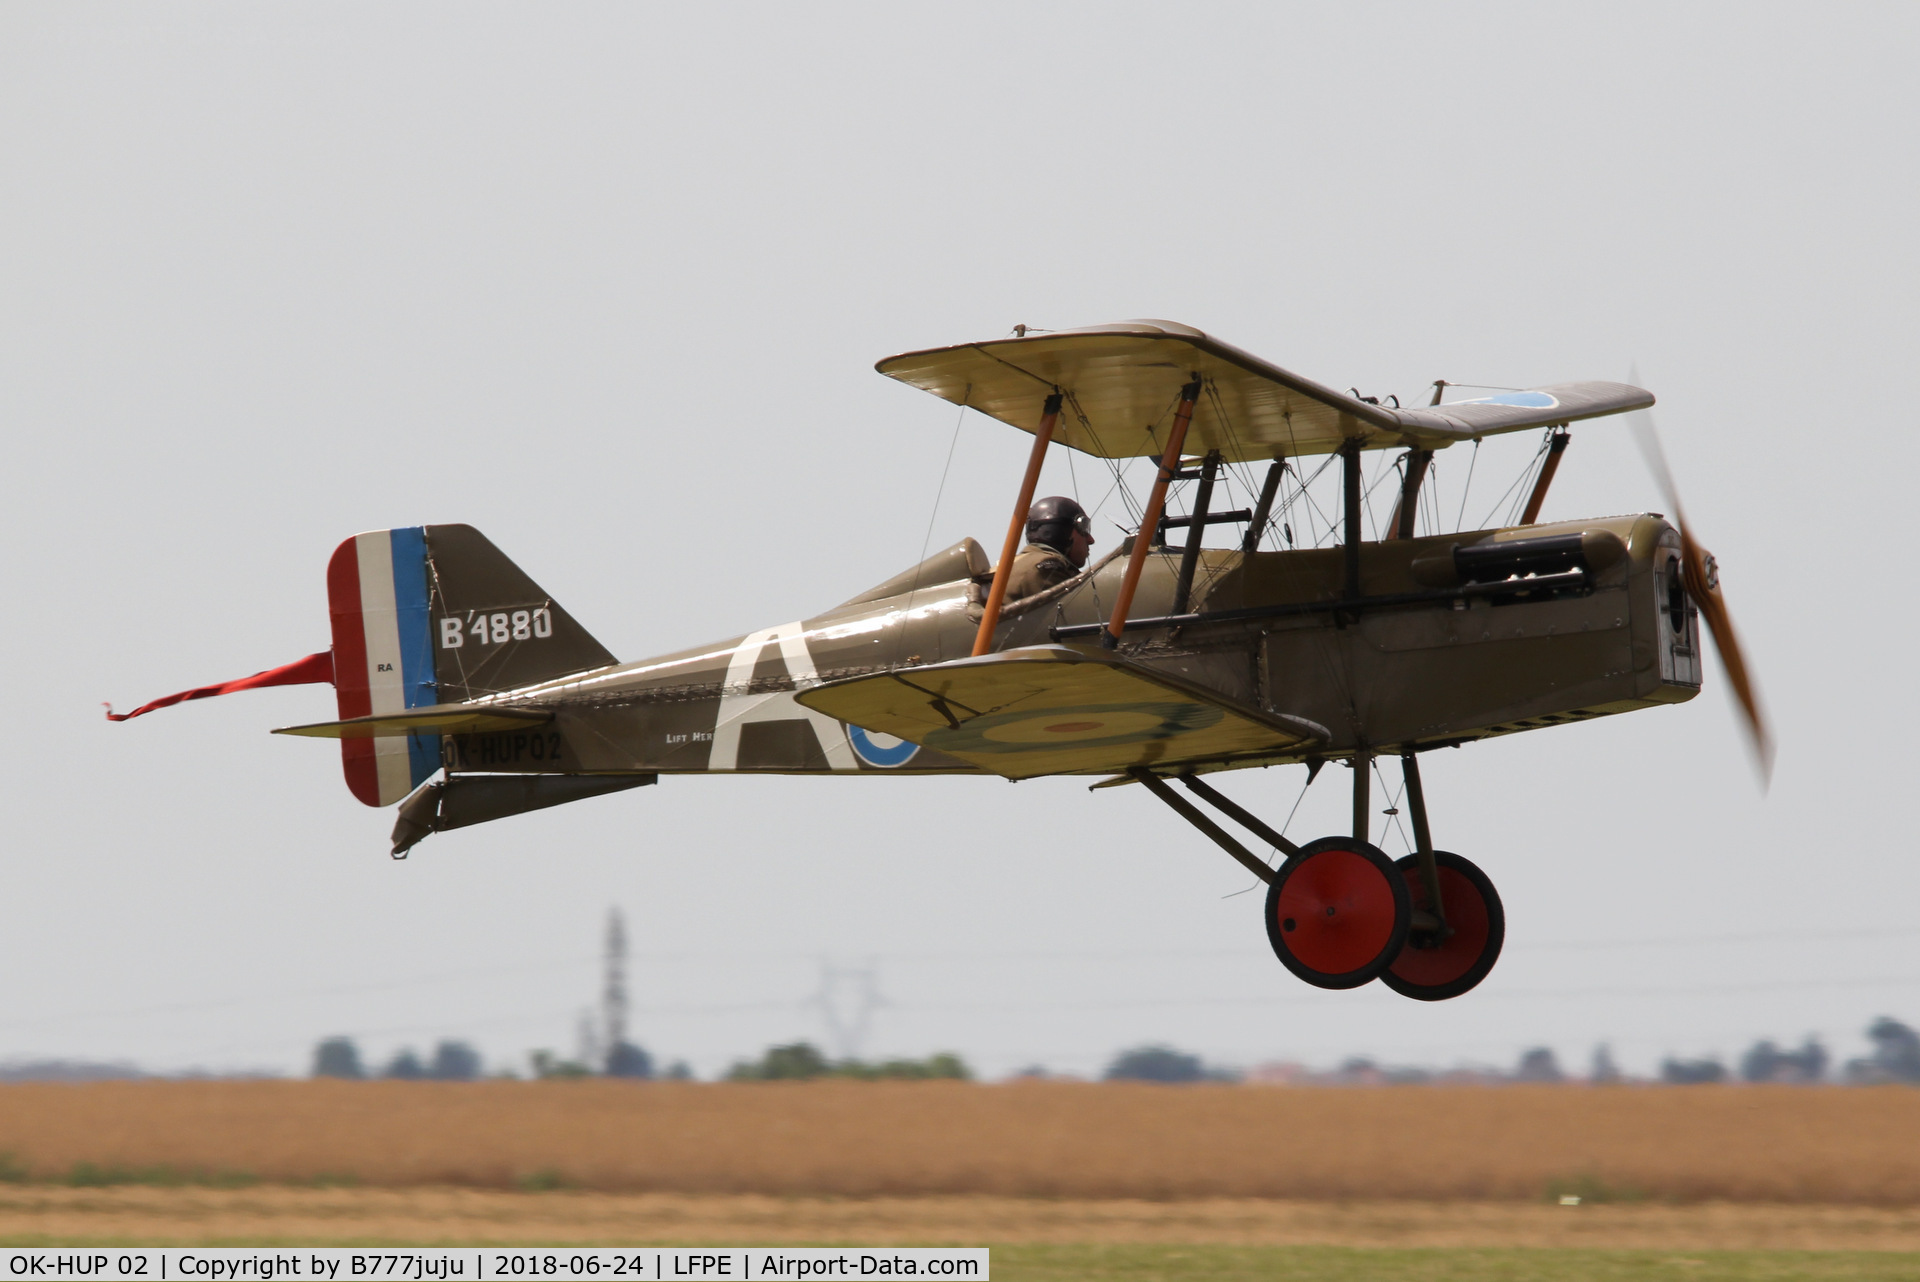 OK-HUP 02, Royal Aircraft Factory SE-5A Replica C/N unknow, at Meaux Airshow